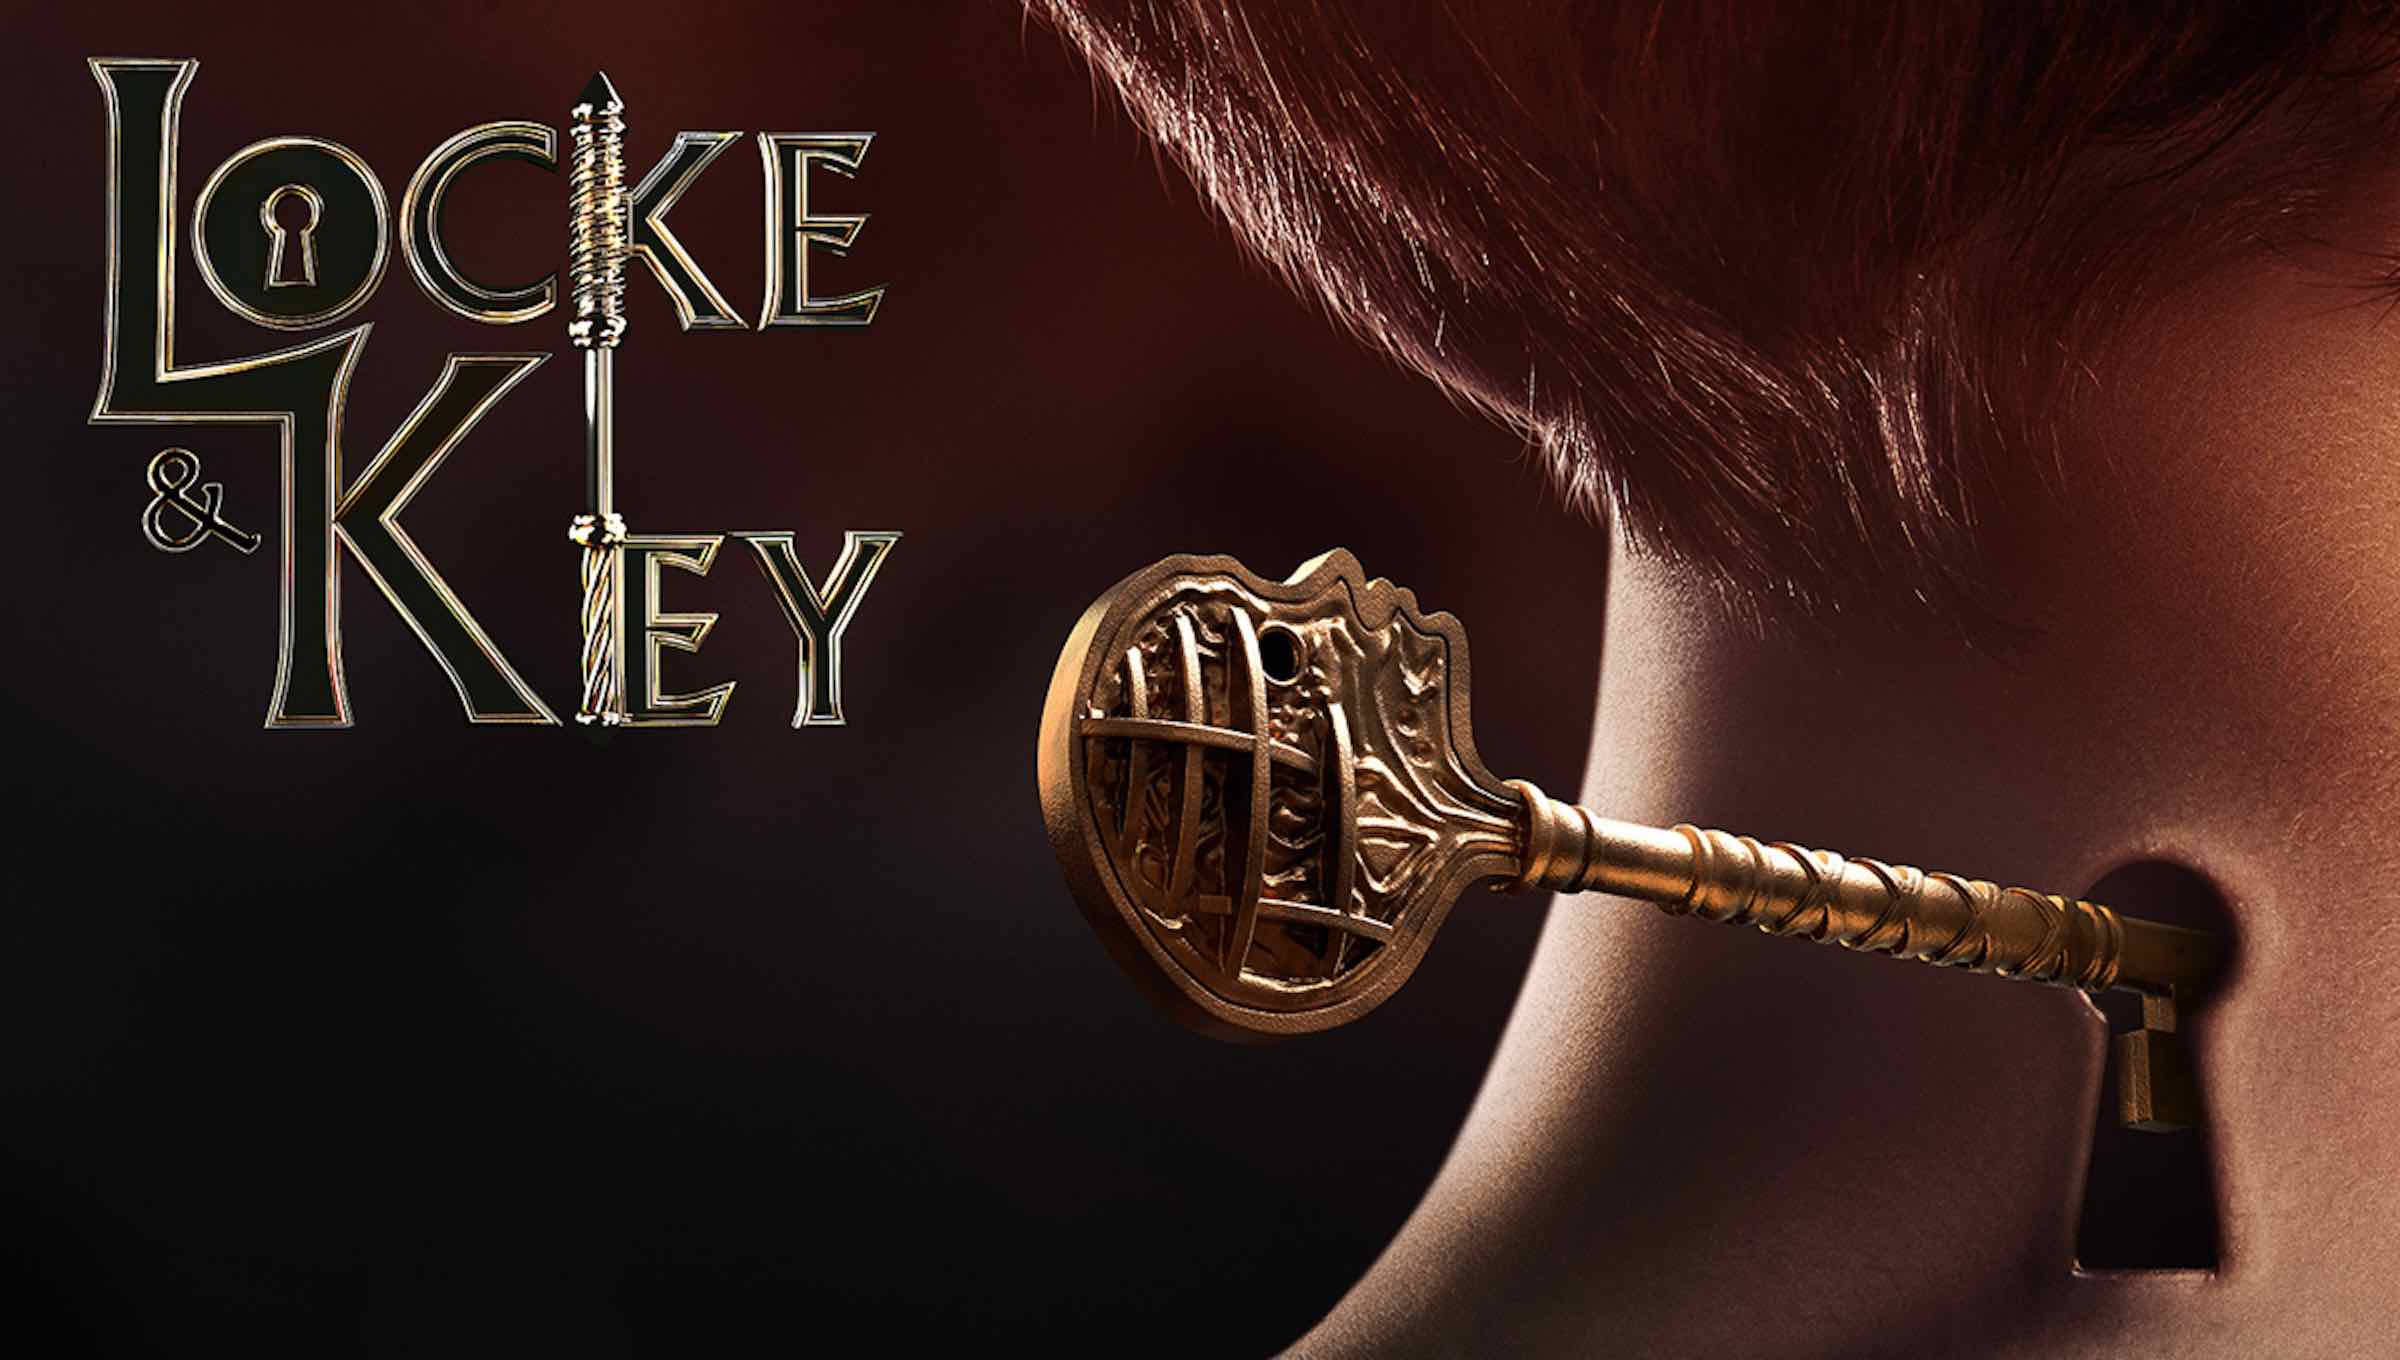 'Locke and Key' focus on three children who explore their ancestral home full of keys that unlock their powers. Here's what's in store.